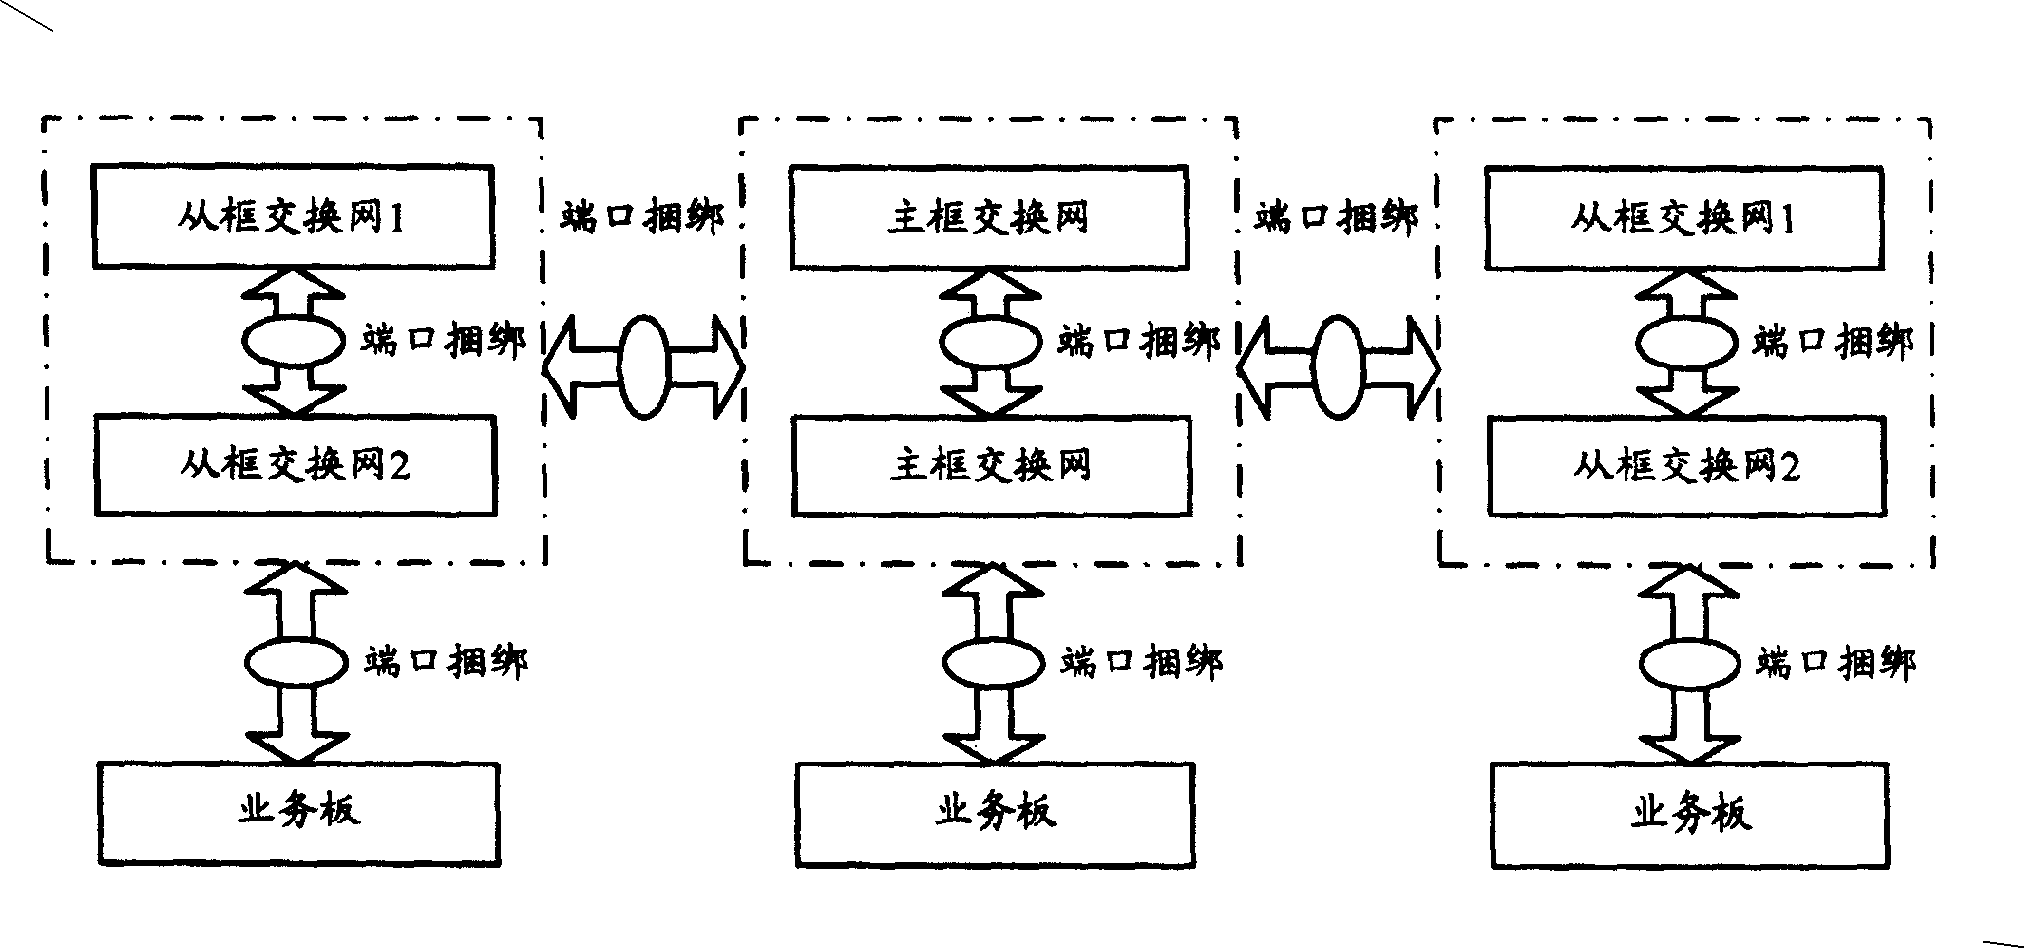 Internal reliable interconnect communication device